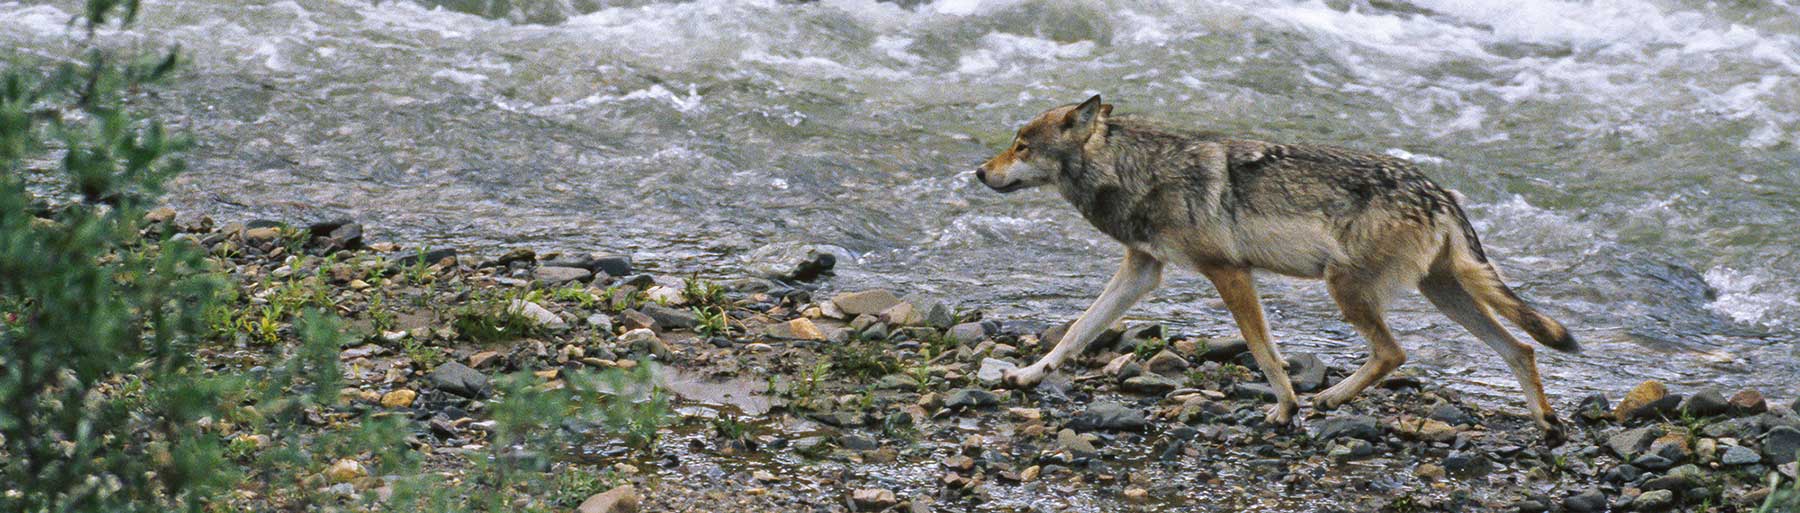 DID YOU KNOW? Wolves rarely pose a threat to people.